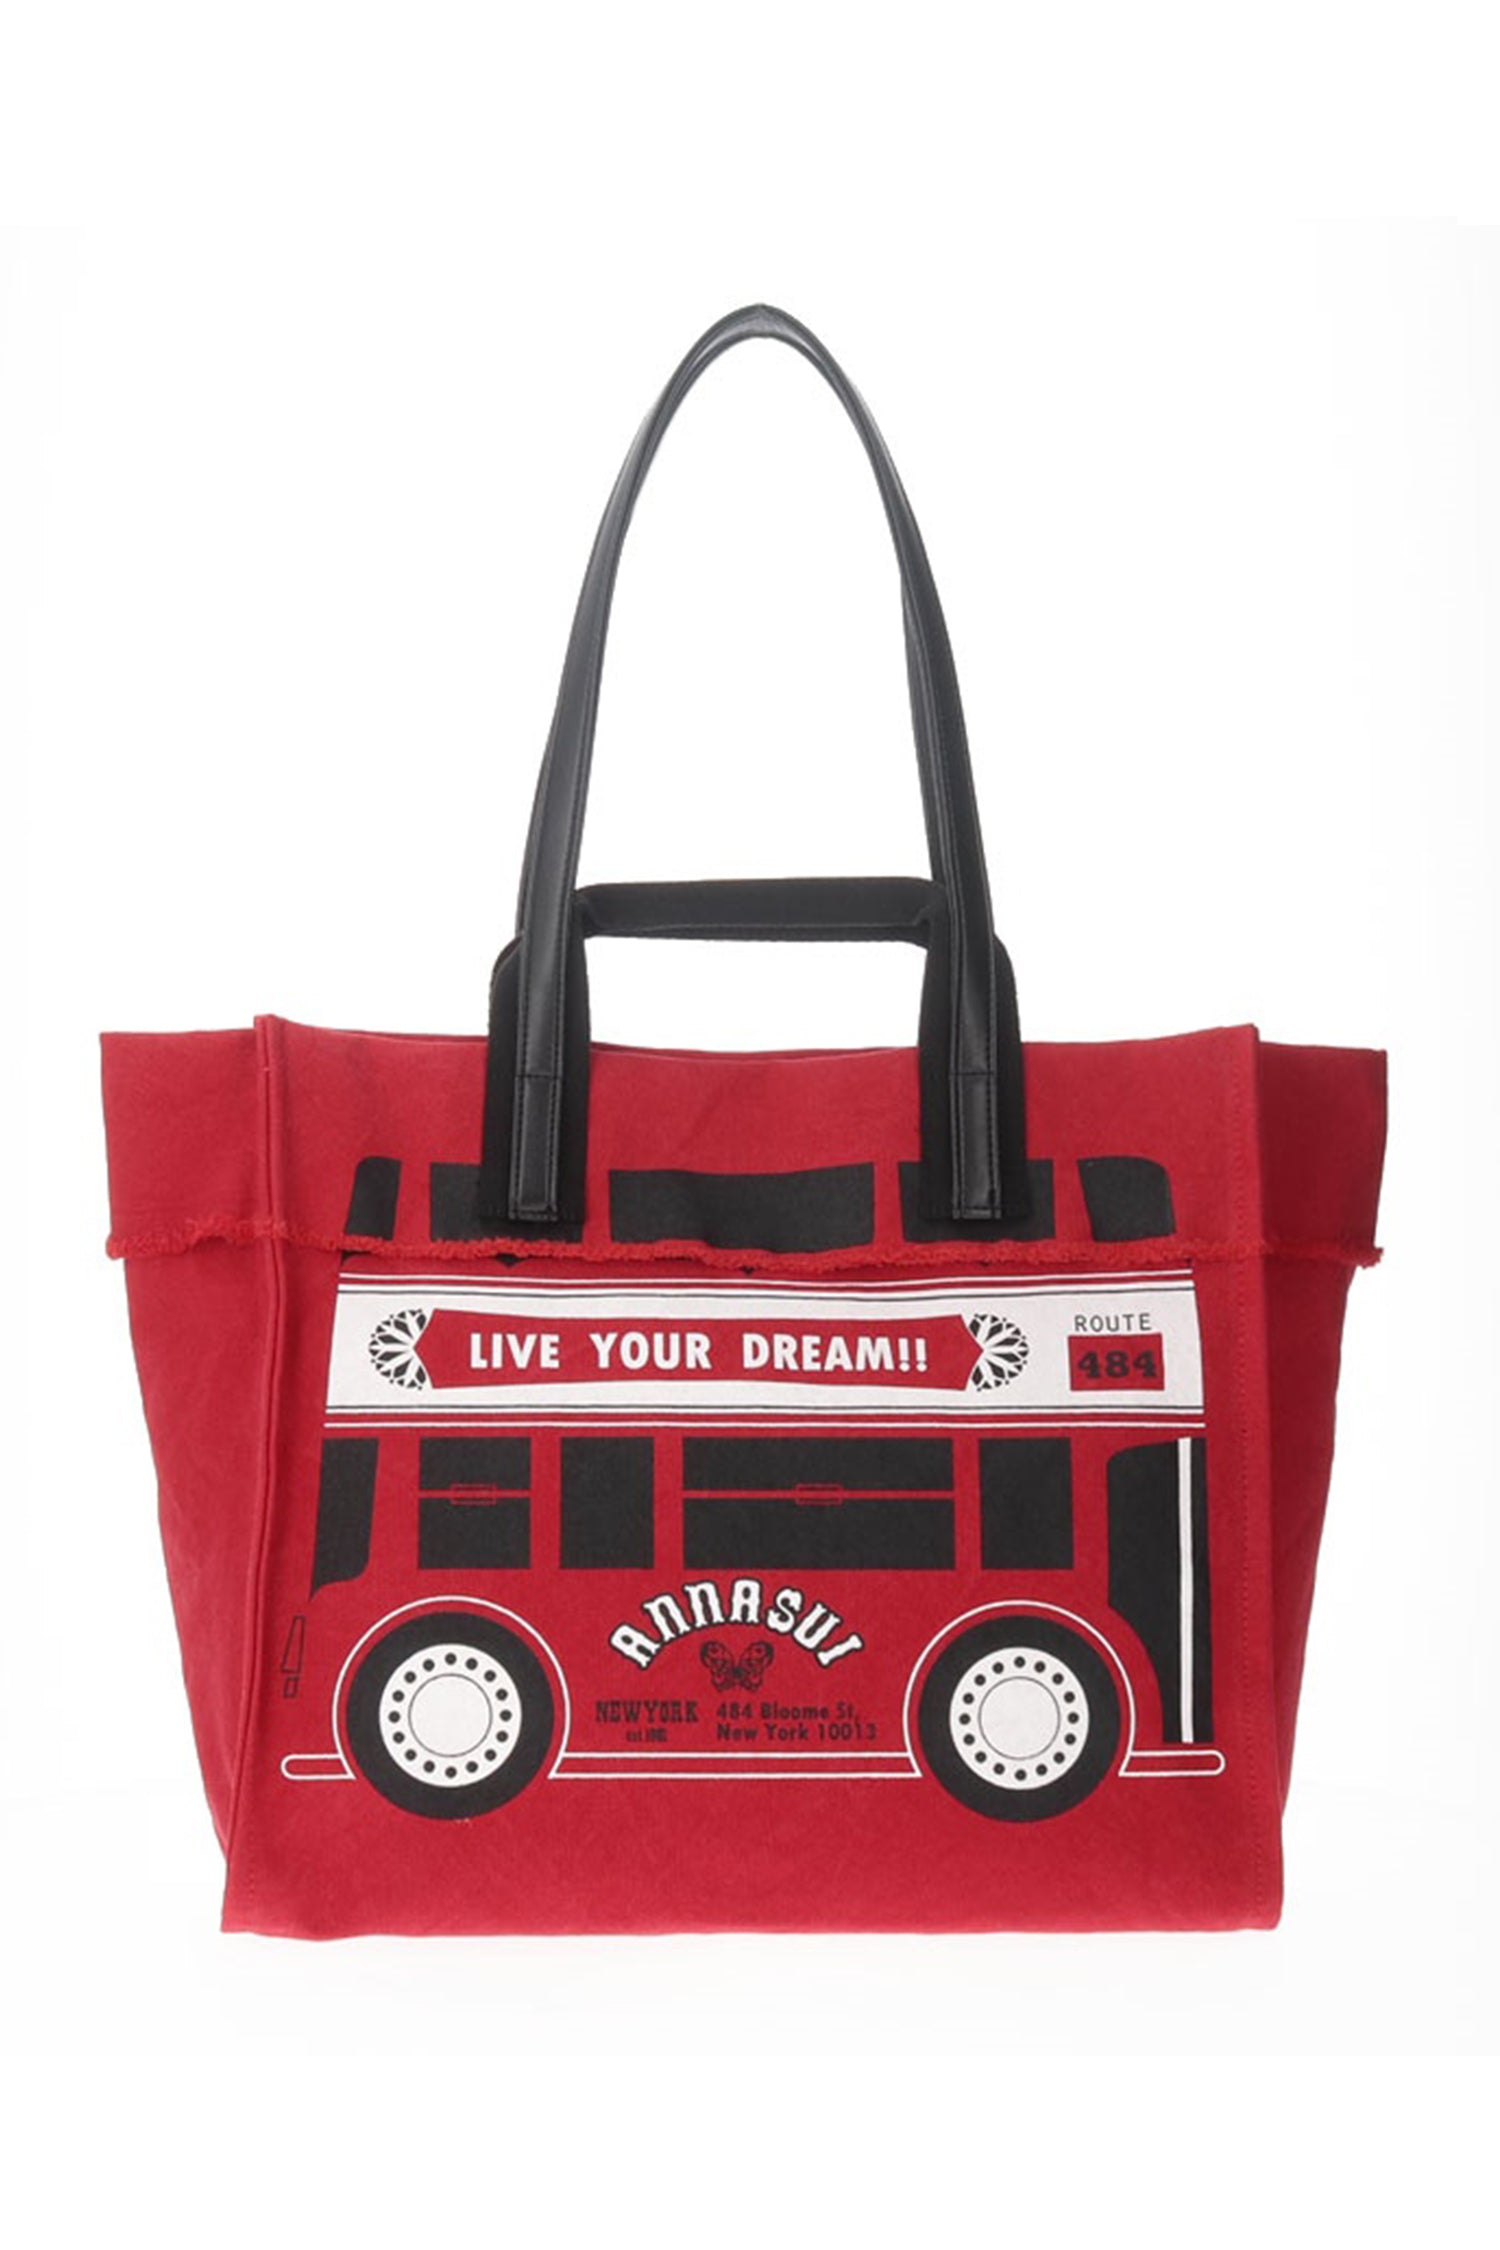 Anna Sui Tote Bag, shows a stylized bus with “live your dream” and “ Anna Sui, 2 sets of handles a pair long a pair short